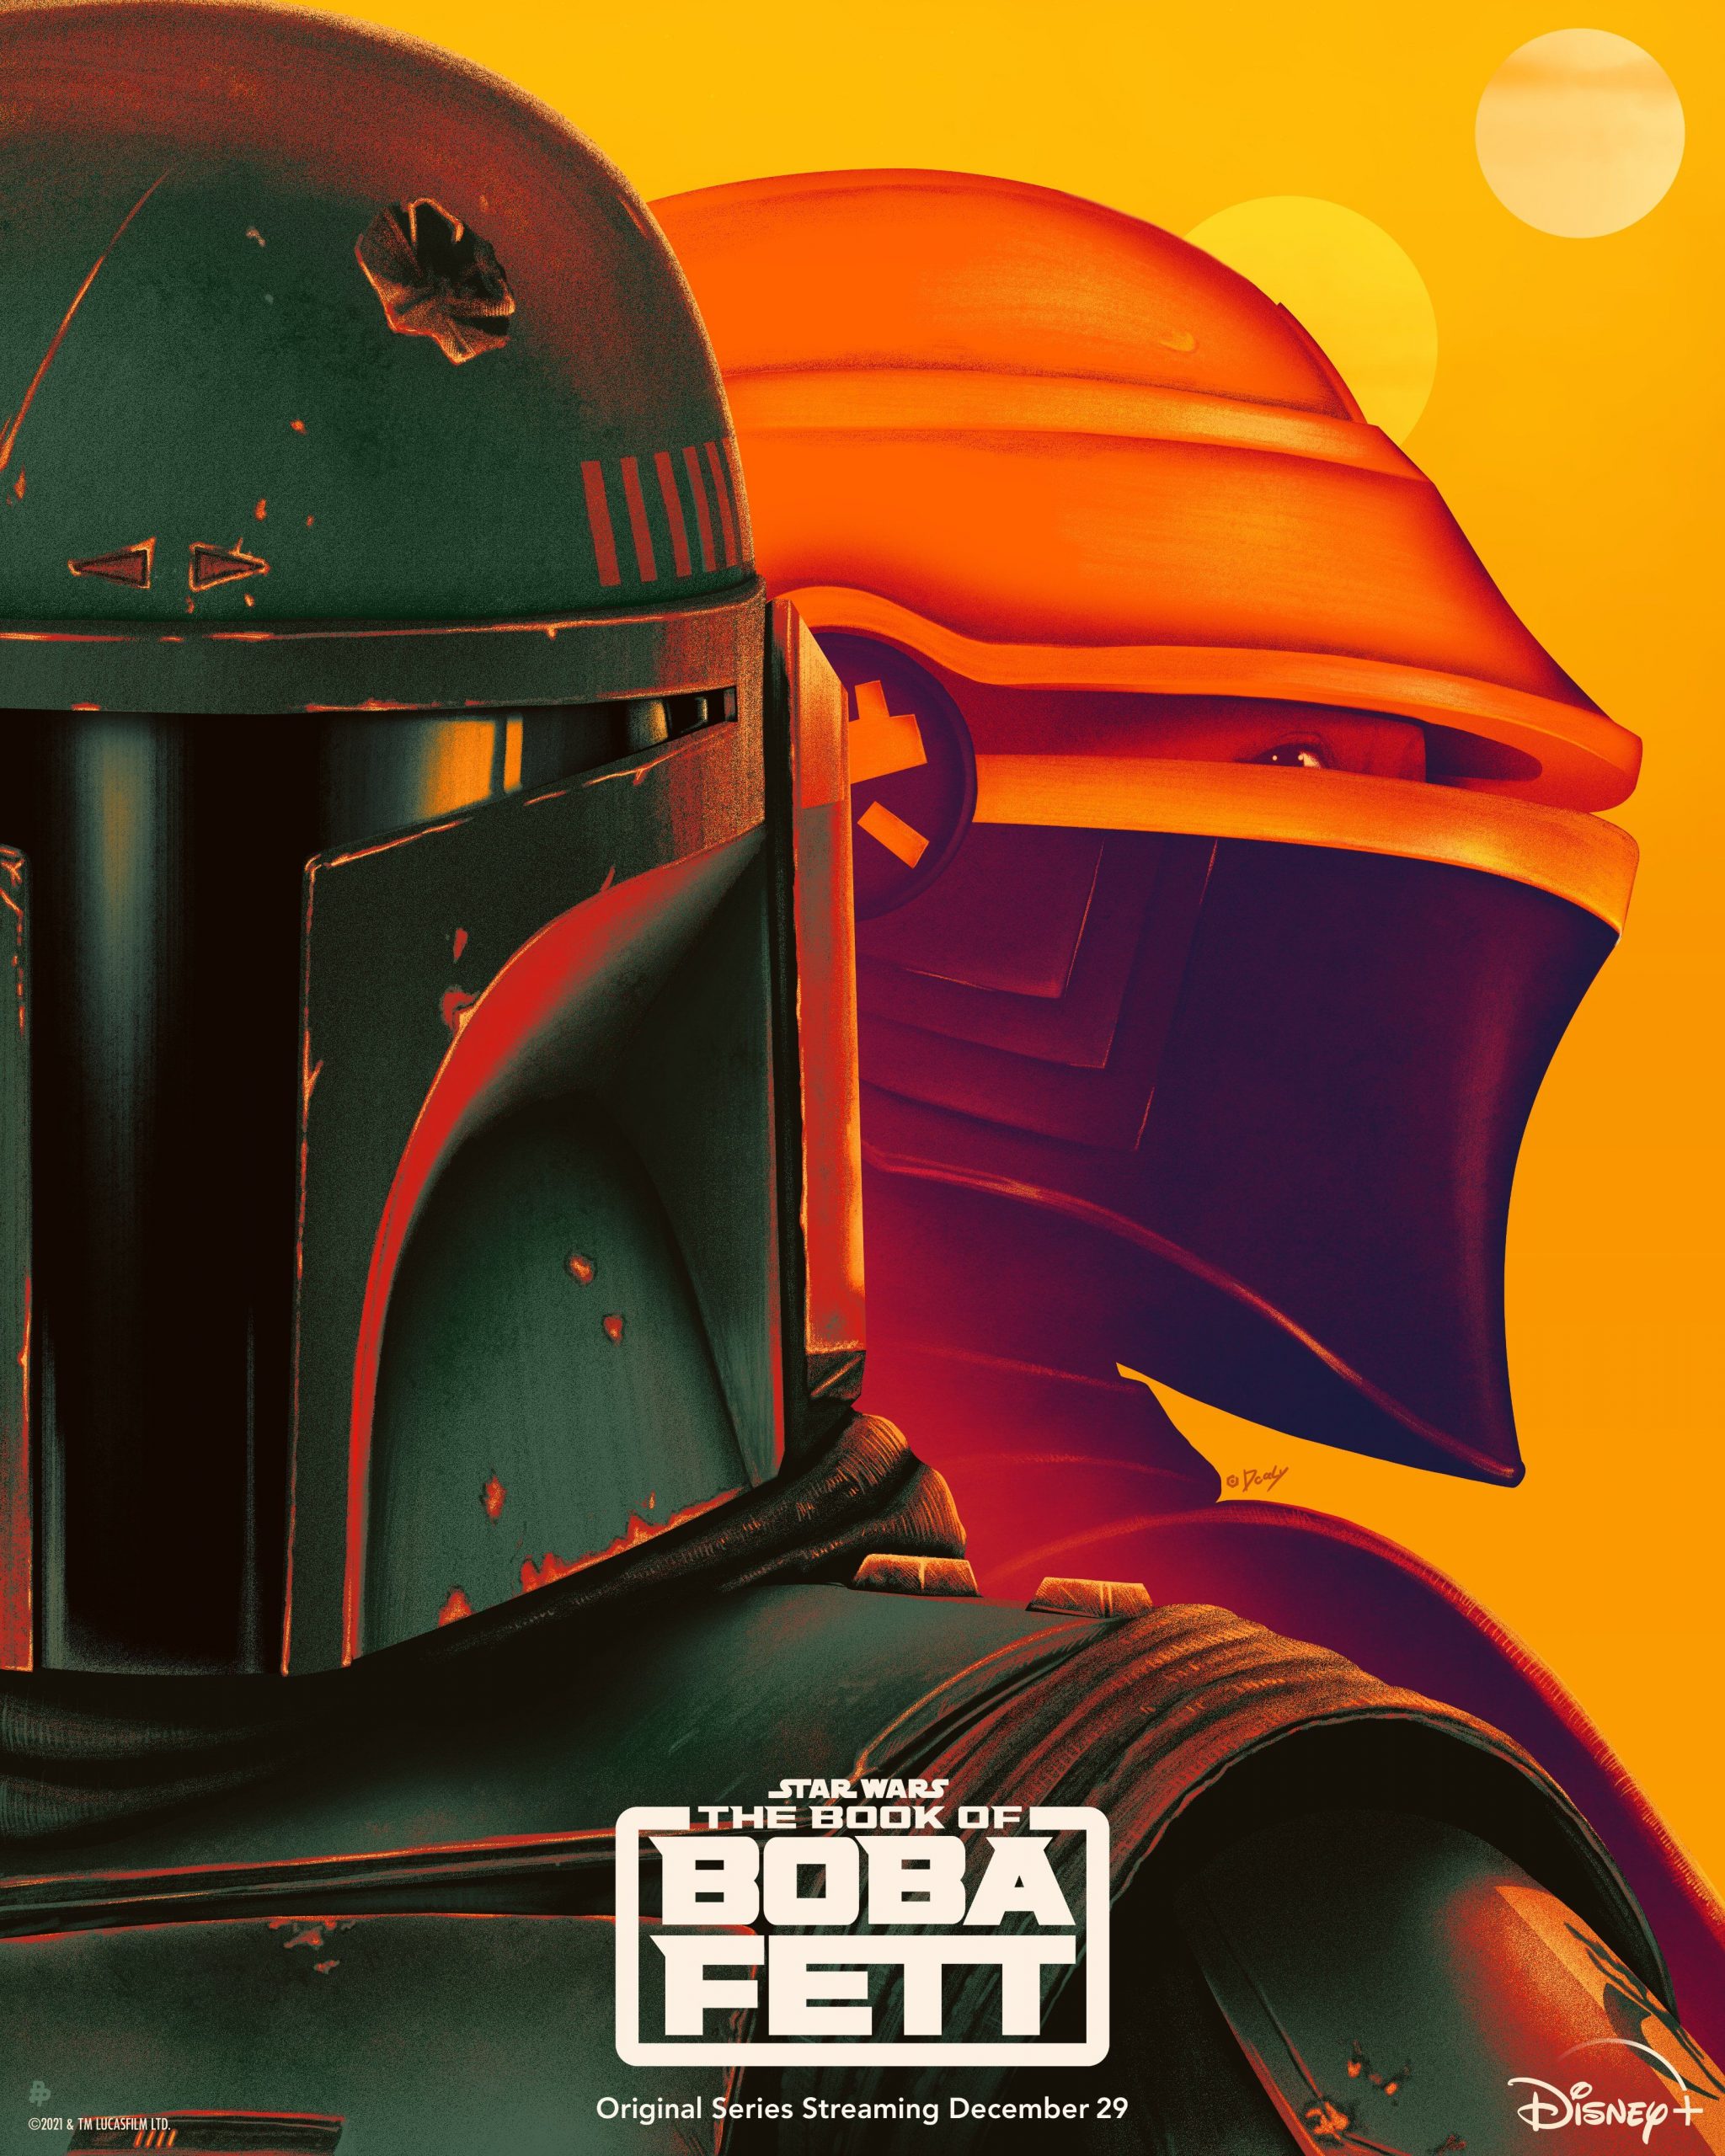 The Book of Boba Fett: What’s in store?